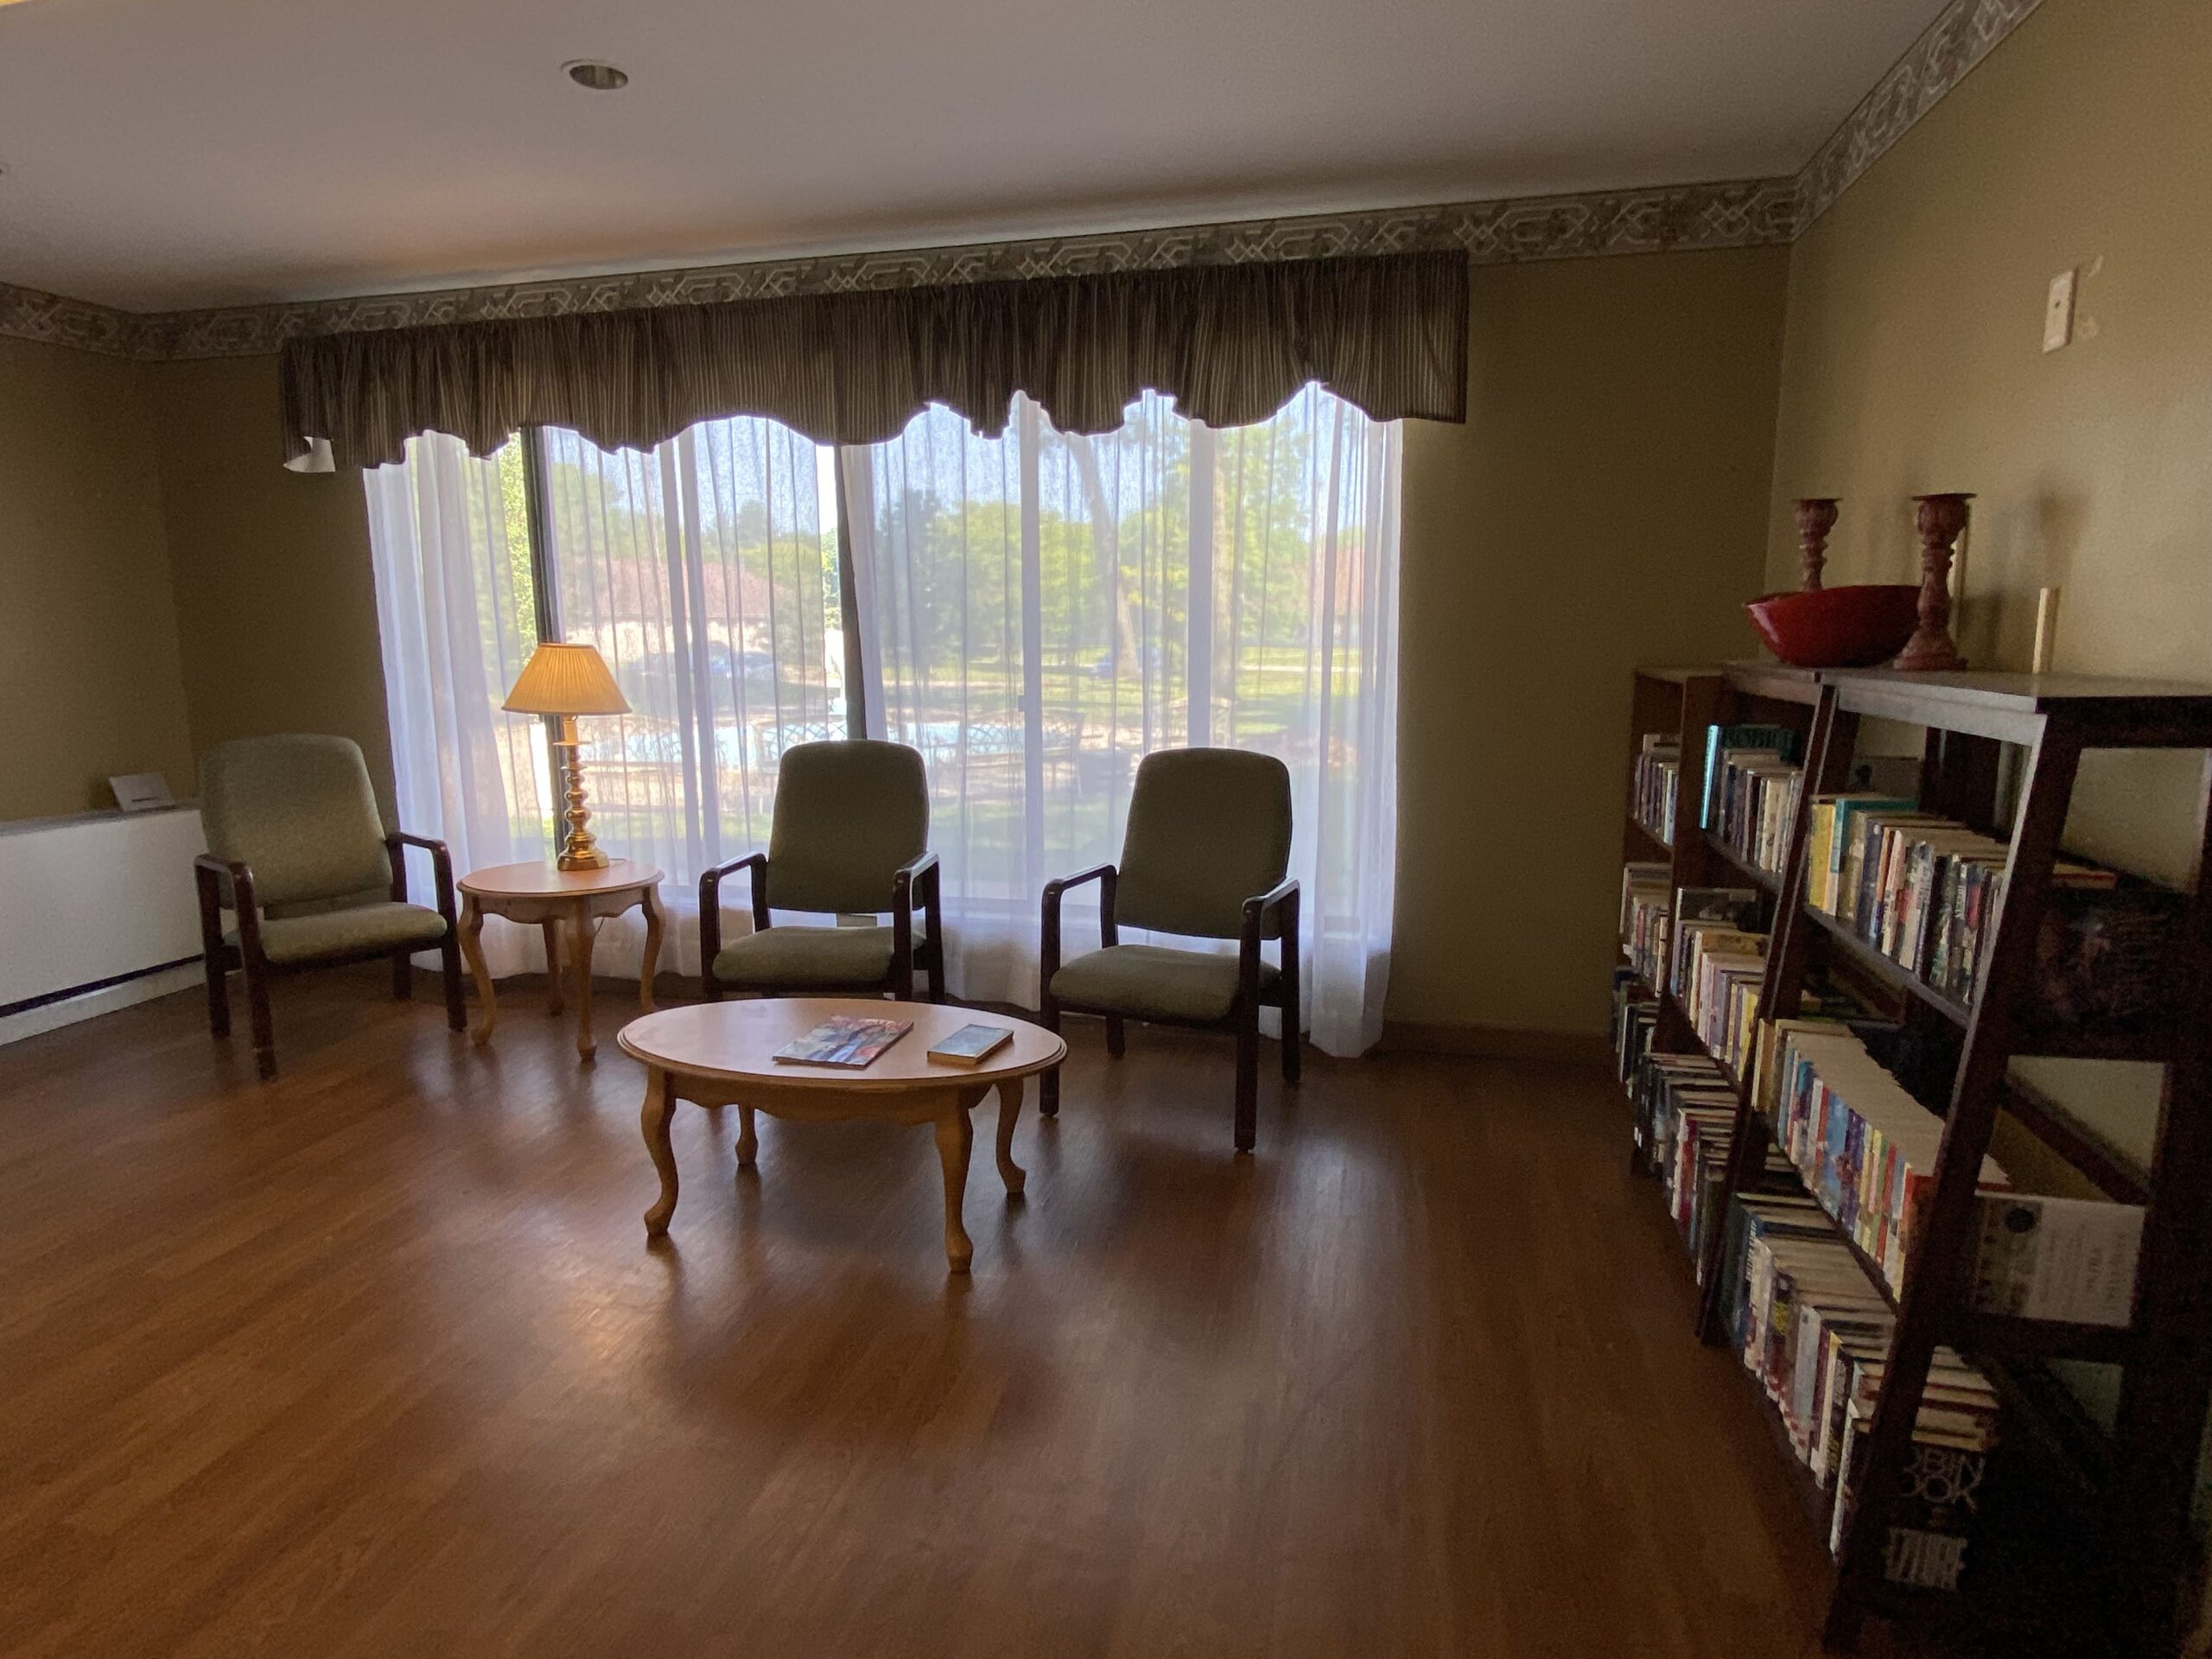 Brickyard Healthcare Fountainview Care Center sitting area for residents